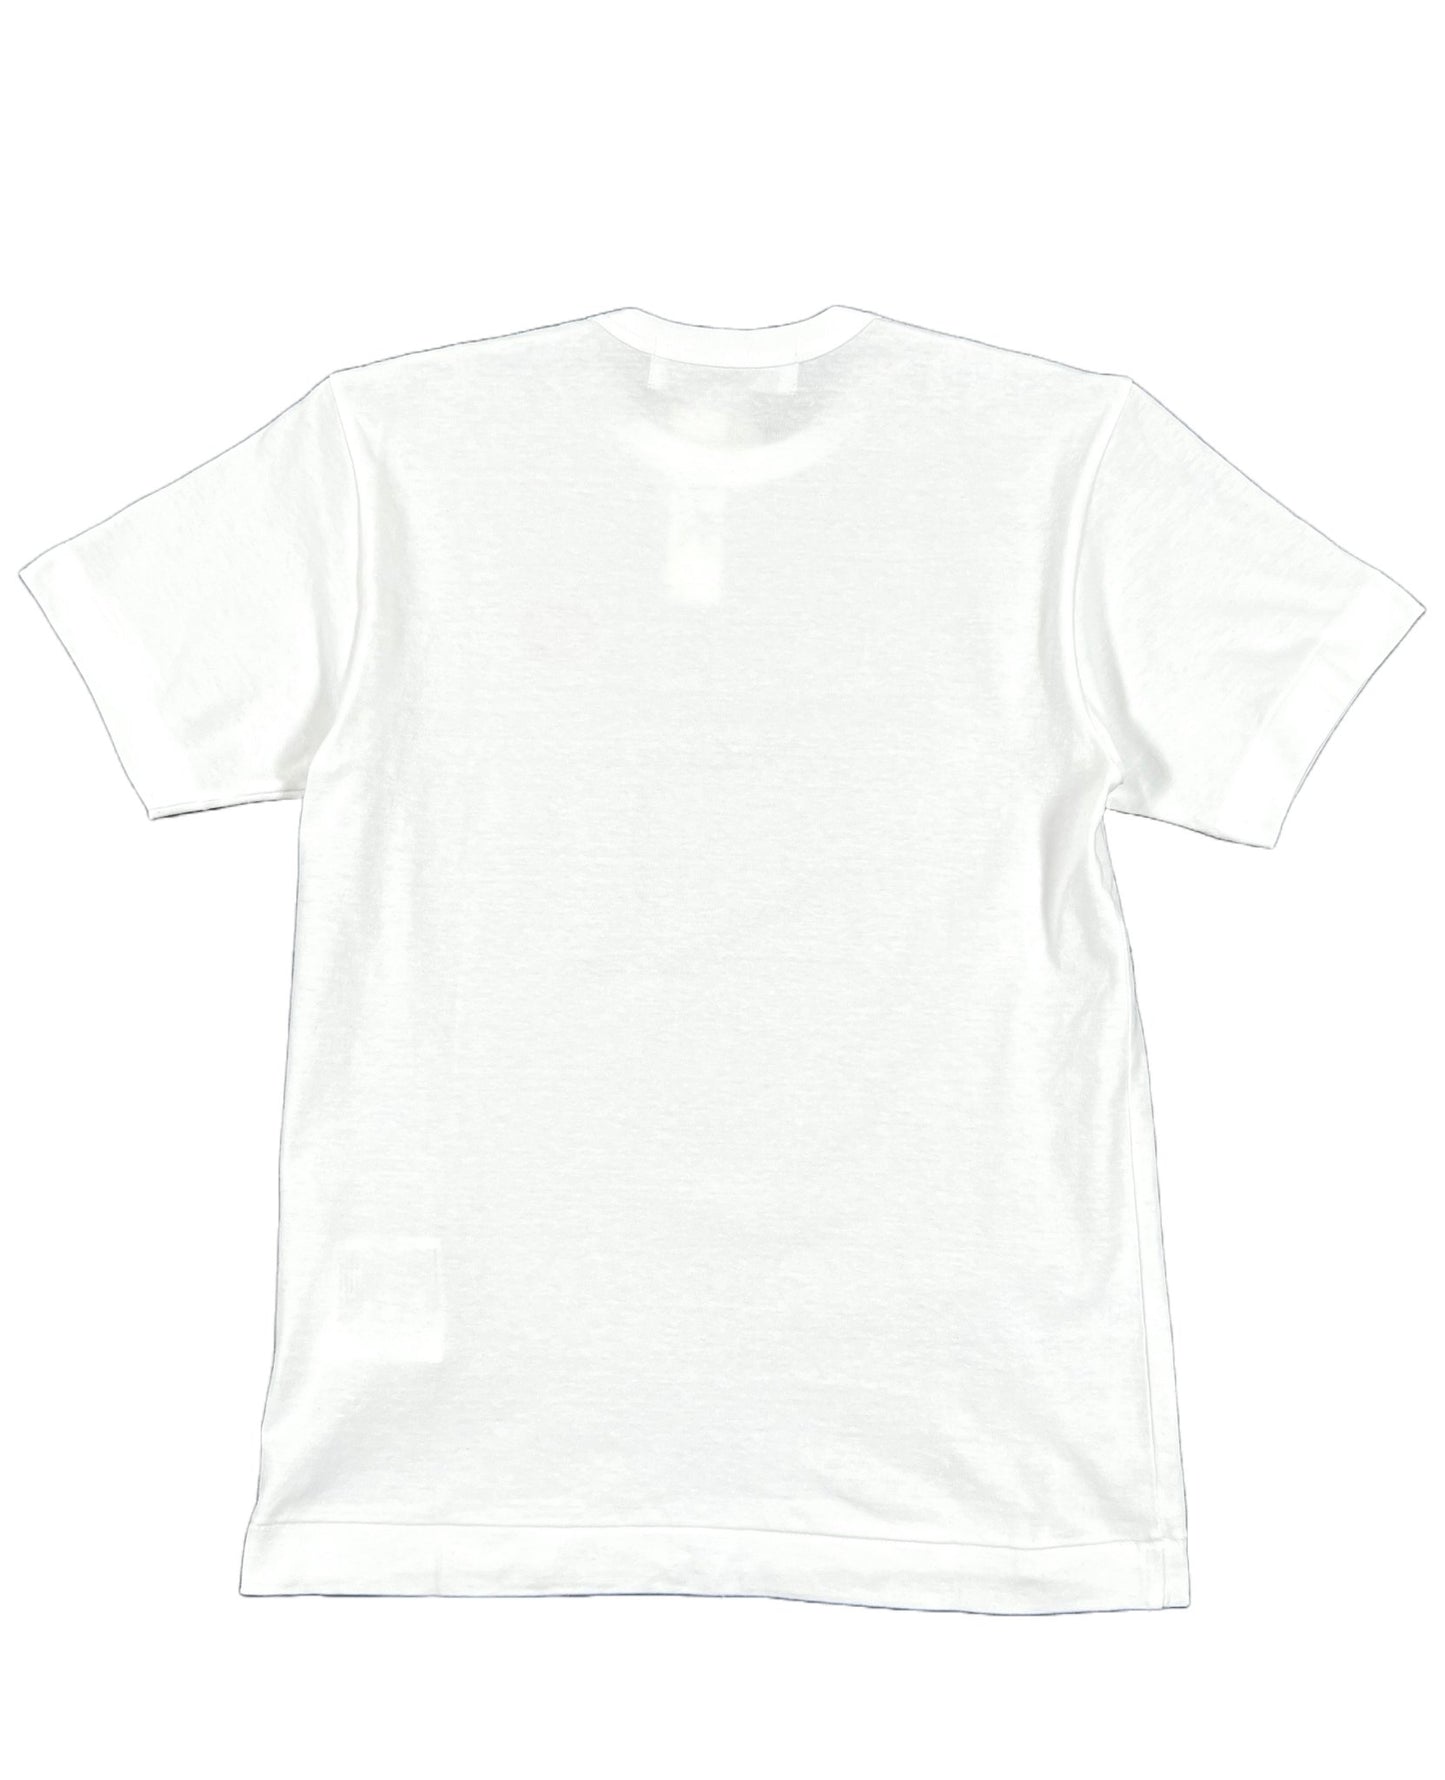 A white DSQUARED2 S71GD1062 COOL TEE WHITE on a white background.